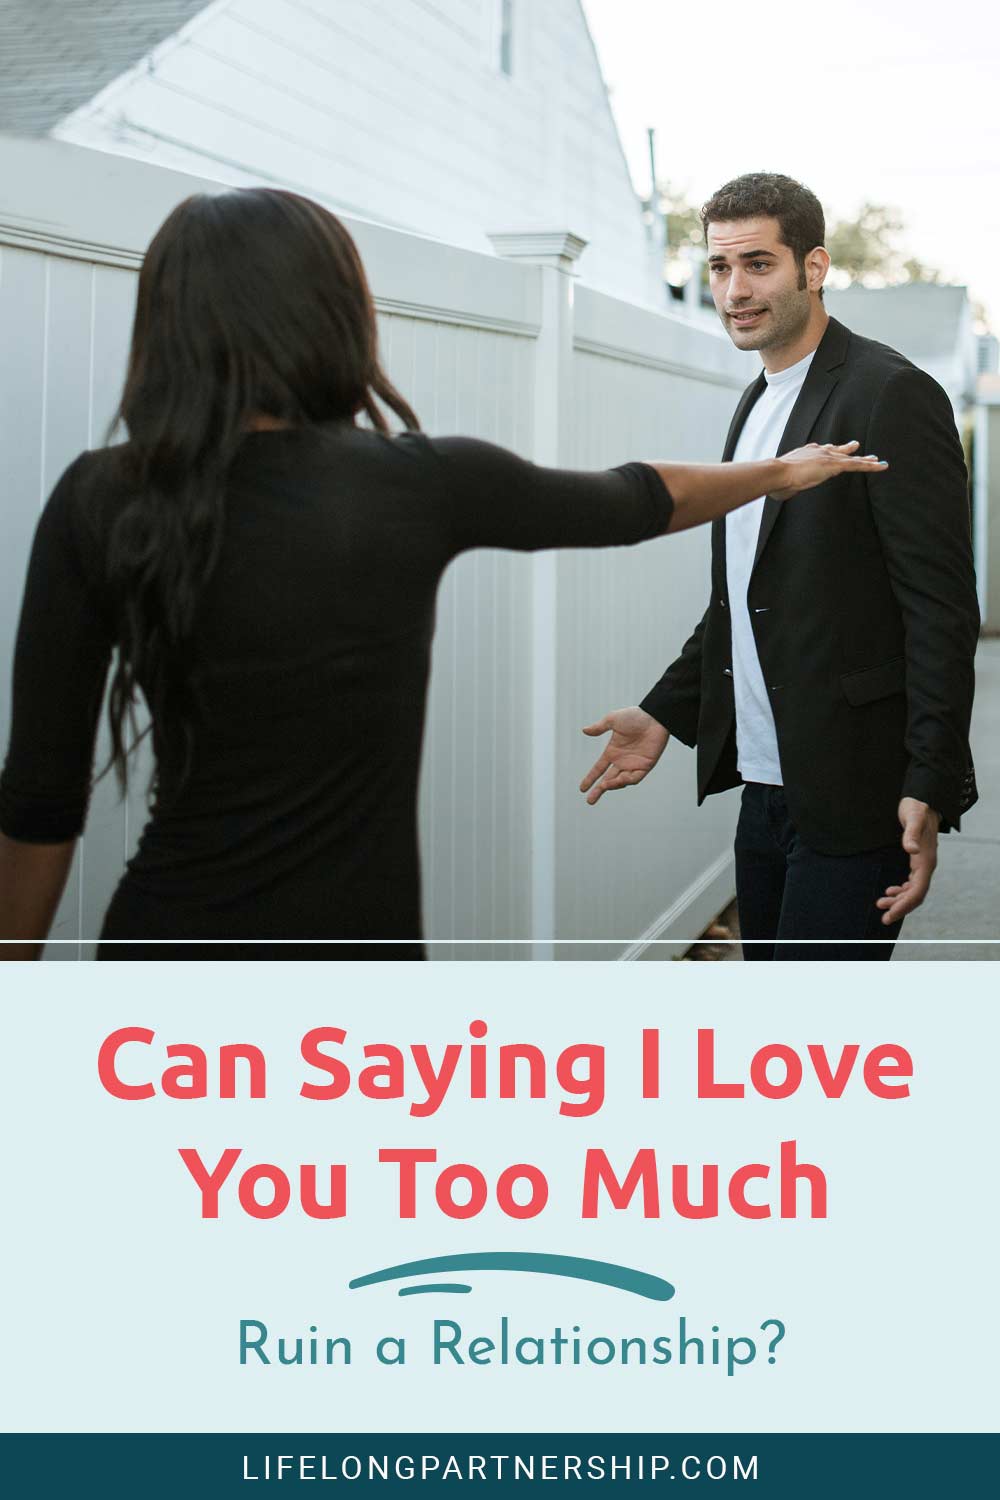 Can Saying I Love You Too Much Ruin a Relationship?